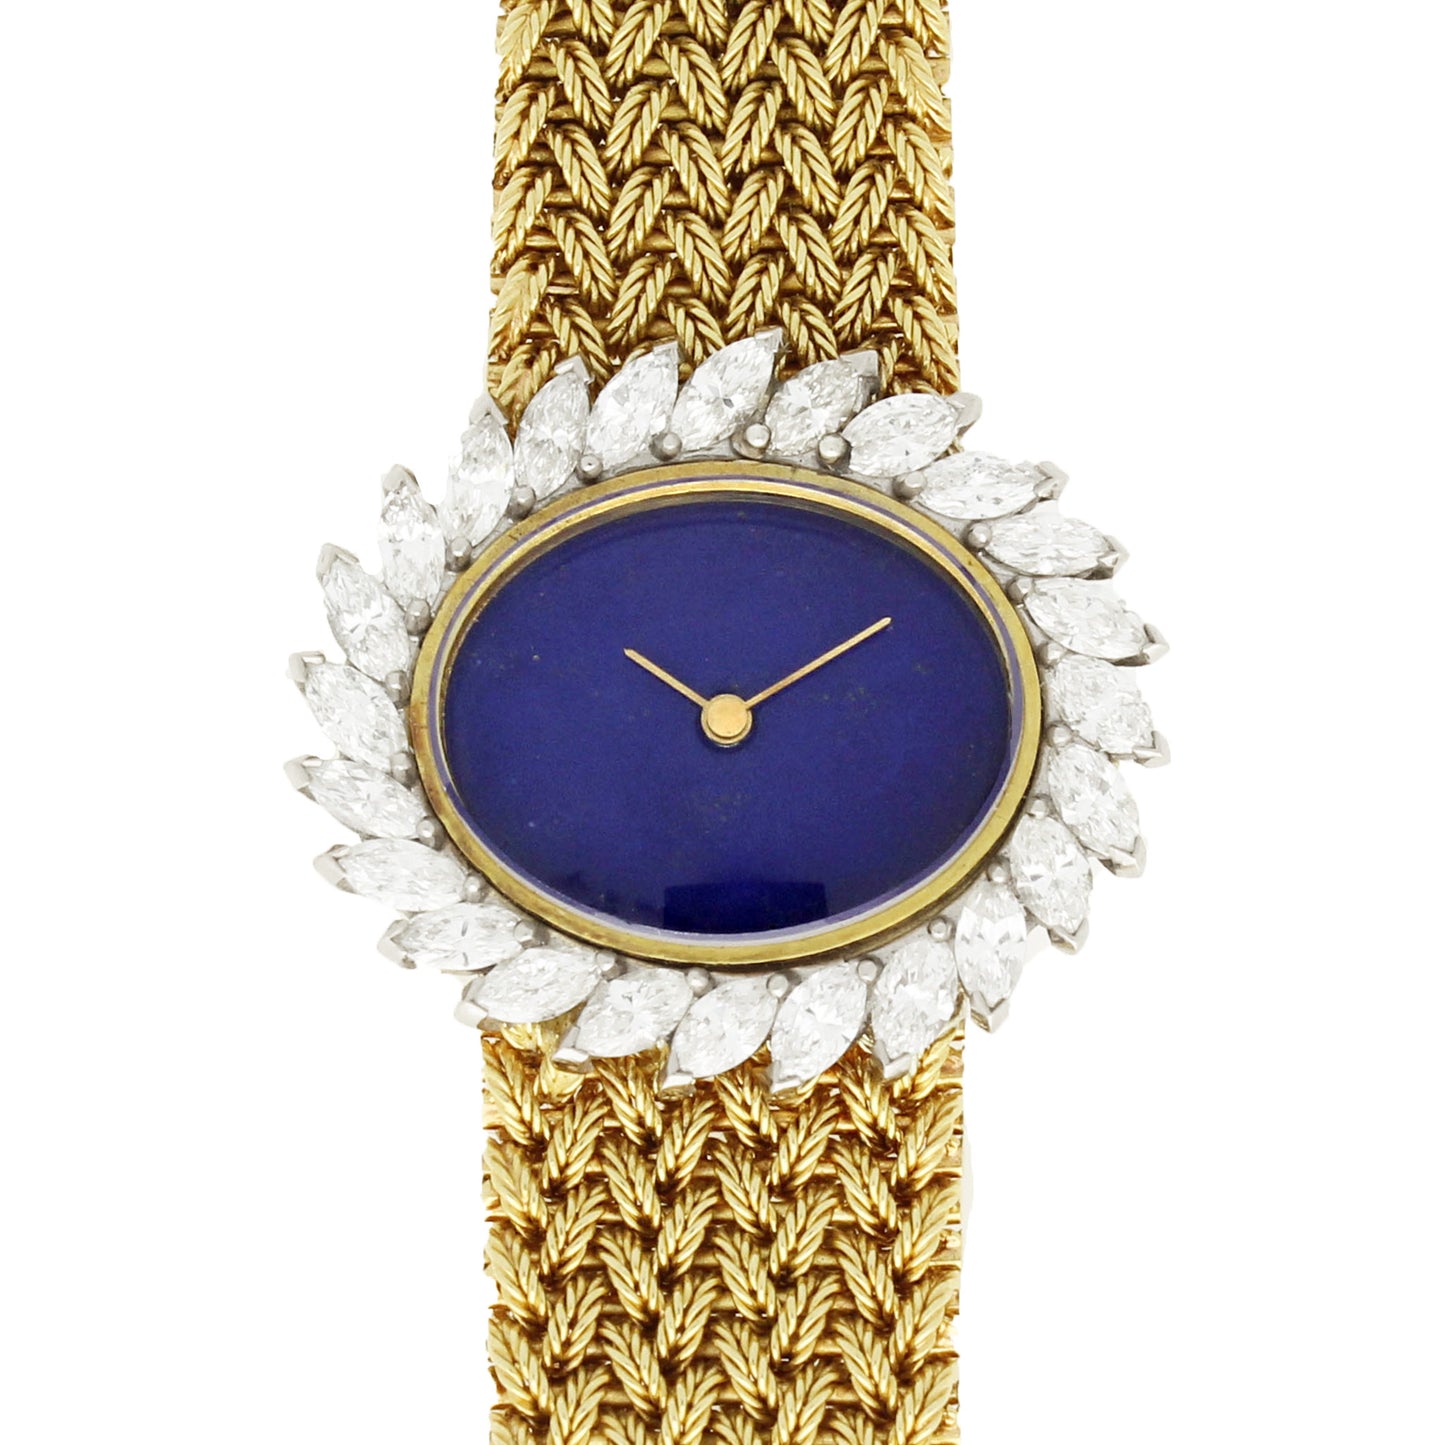 18ct yellow gold and diamond set bracelet watch with lapis lazuli dial. Made 1970's